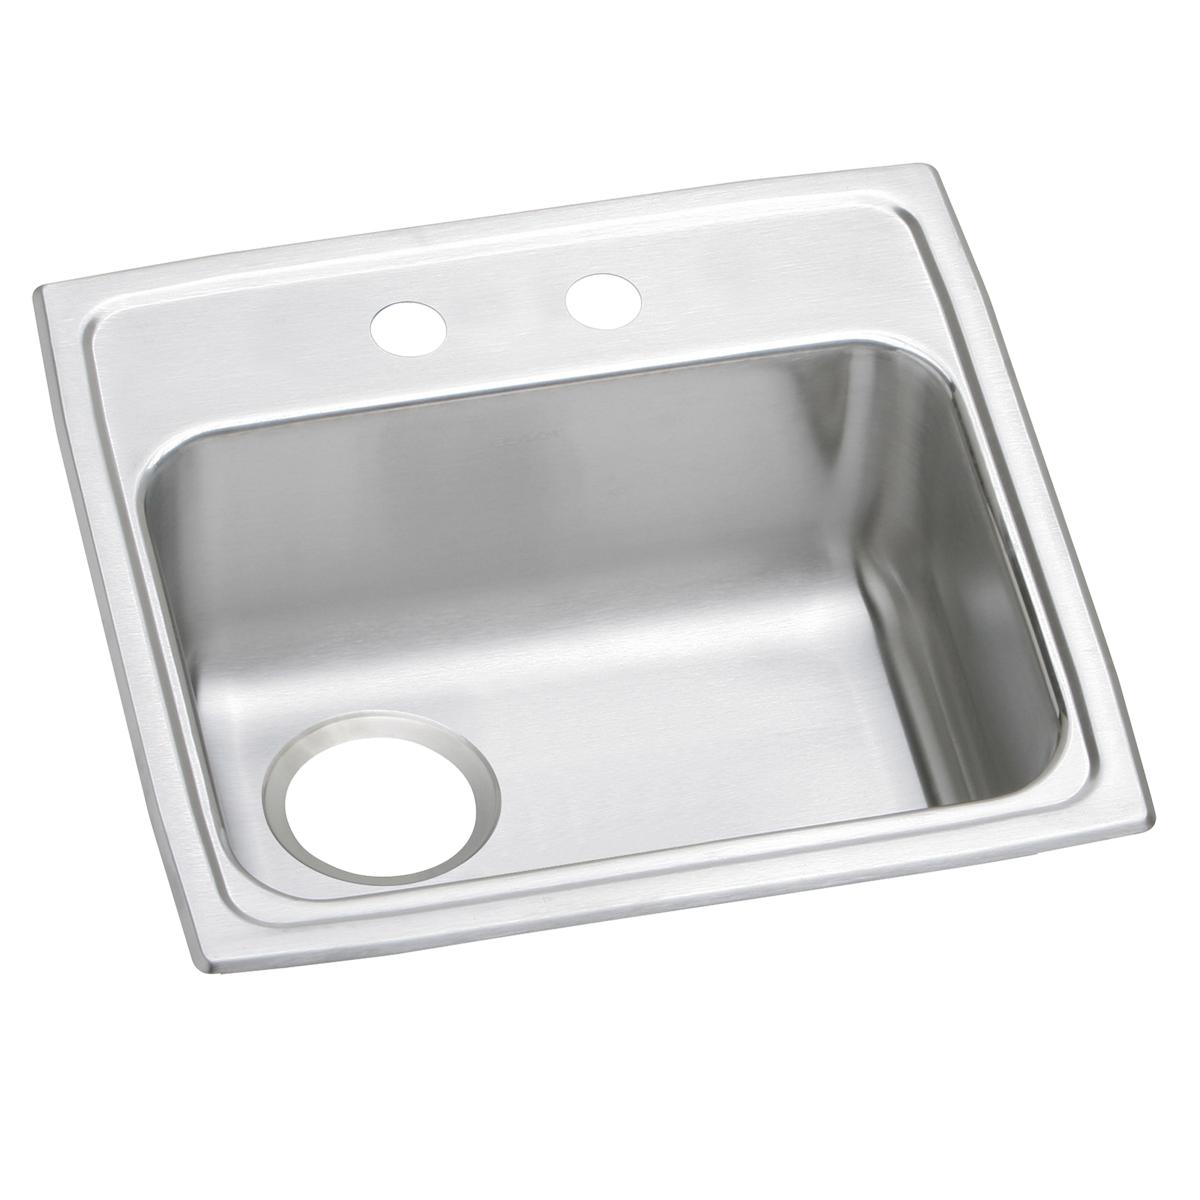 Elkay Celebrity 19-1/2" x 19" x 5-1/2" Single Bowl Drop-in ADA Sink with Quick-clip and Left Drain